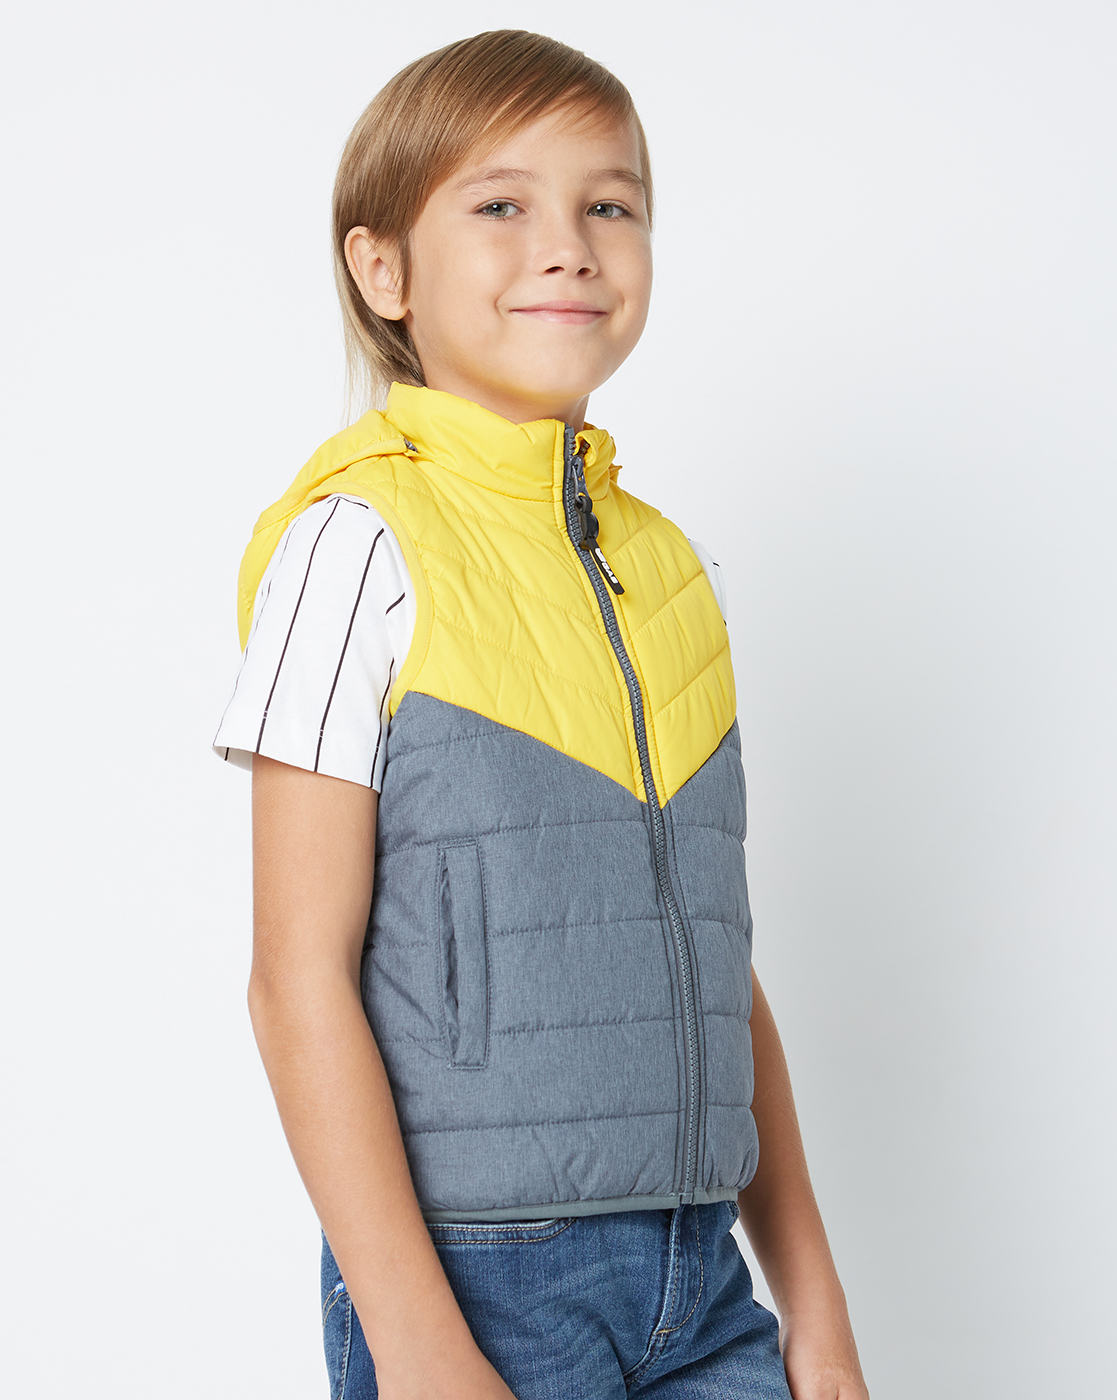 Gas Kids Boys Grey Color Block Quilted Jacket